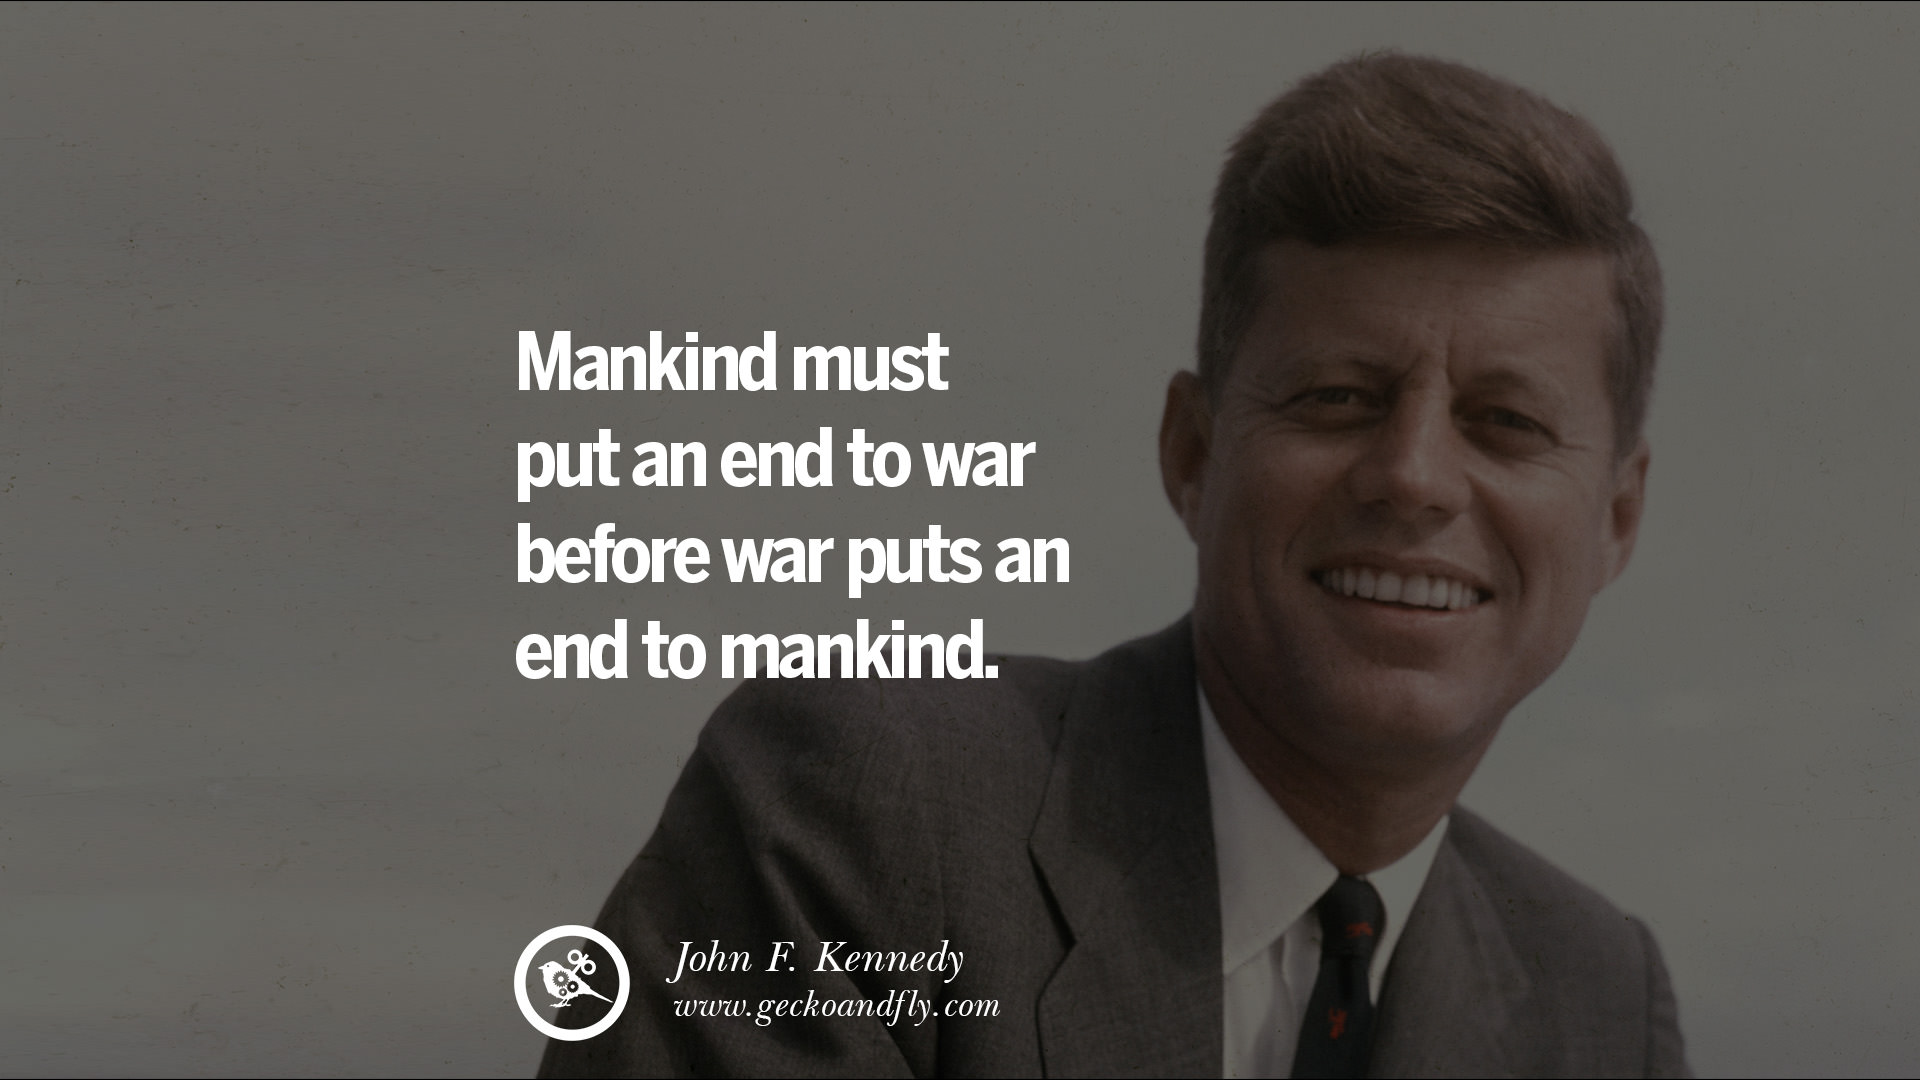 16 Famous President John F. Kennedy Quotes on Freedom, Peace, War and